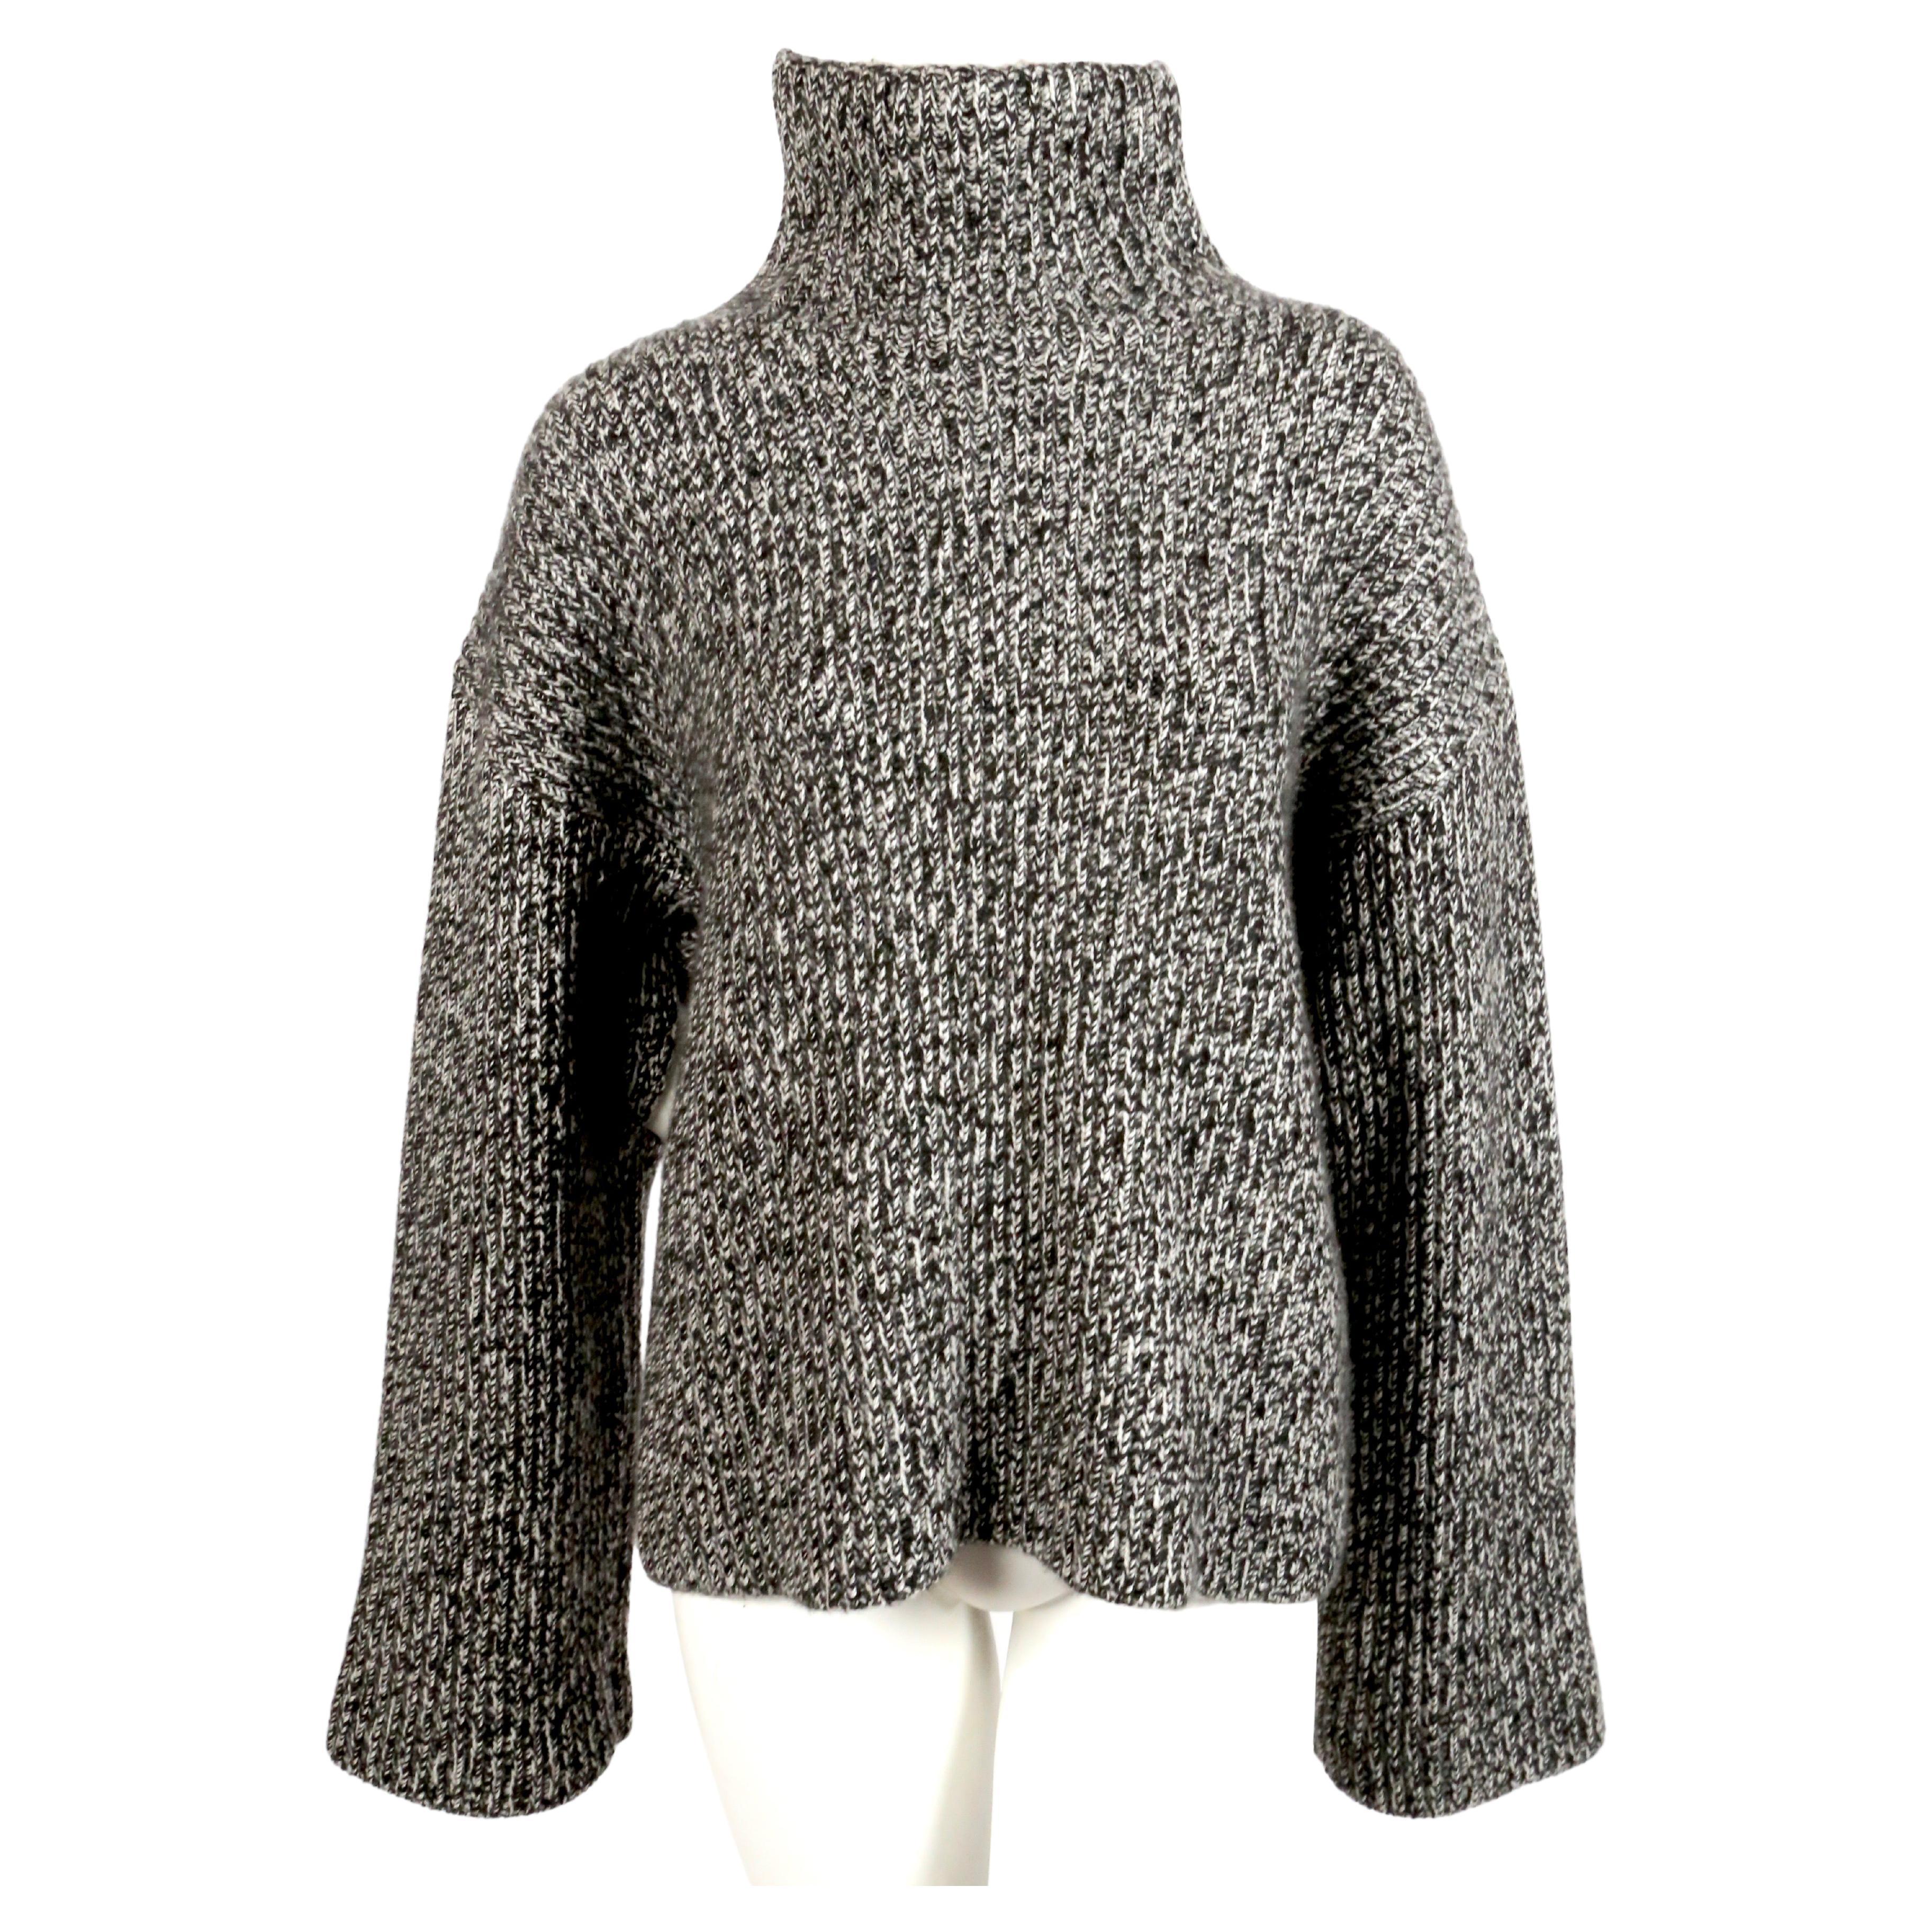 Black and off-white fuzzy cashmere stand-up collar jumper from Celine features a high standing collar, long sleeves with cutouts under arms, a chunky knit and a straight hem. Sweater can be worn similar to a cape with the underarm cutouts. Designed